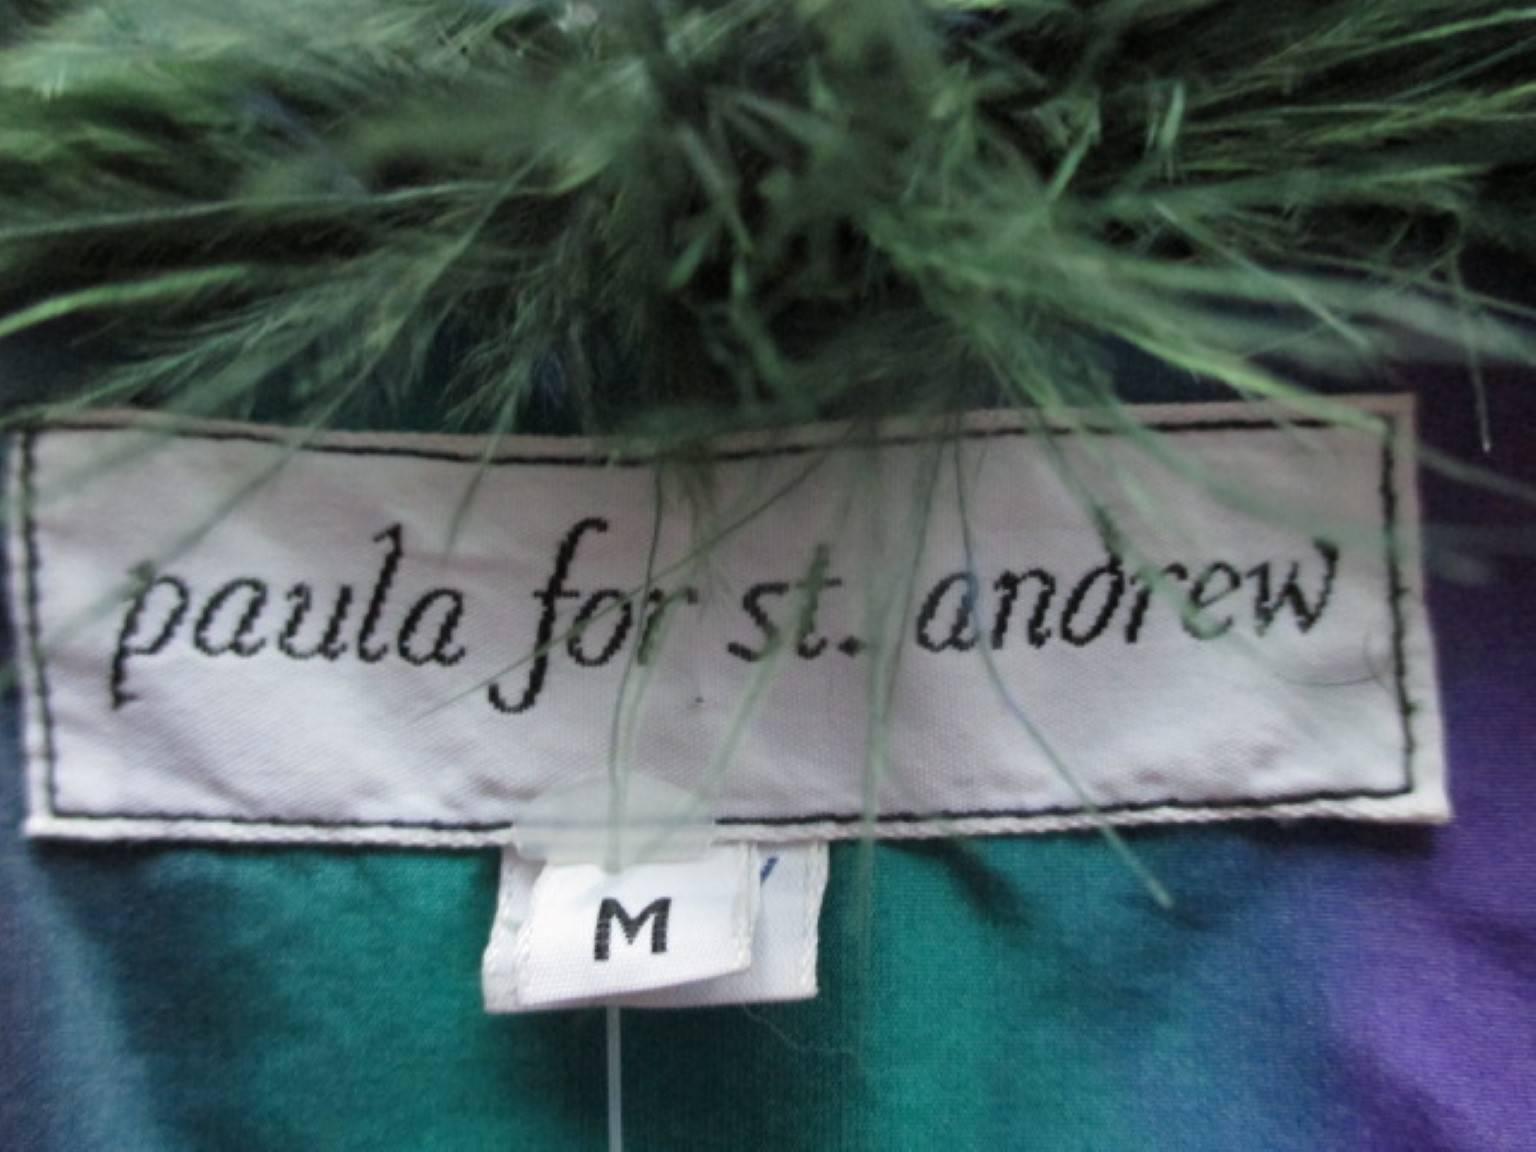 This vintage coat is with rainbow stripes and a rainbow lining from Paula for st. Andrews.
The coat is very light to wear and like all feather coats its very delicate and has condition issues.

Its very theatrical/stage piece and a collectors